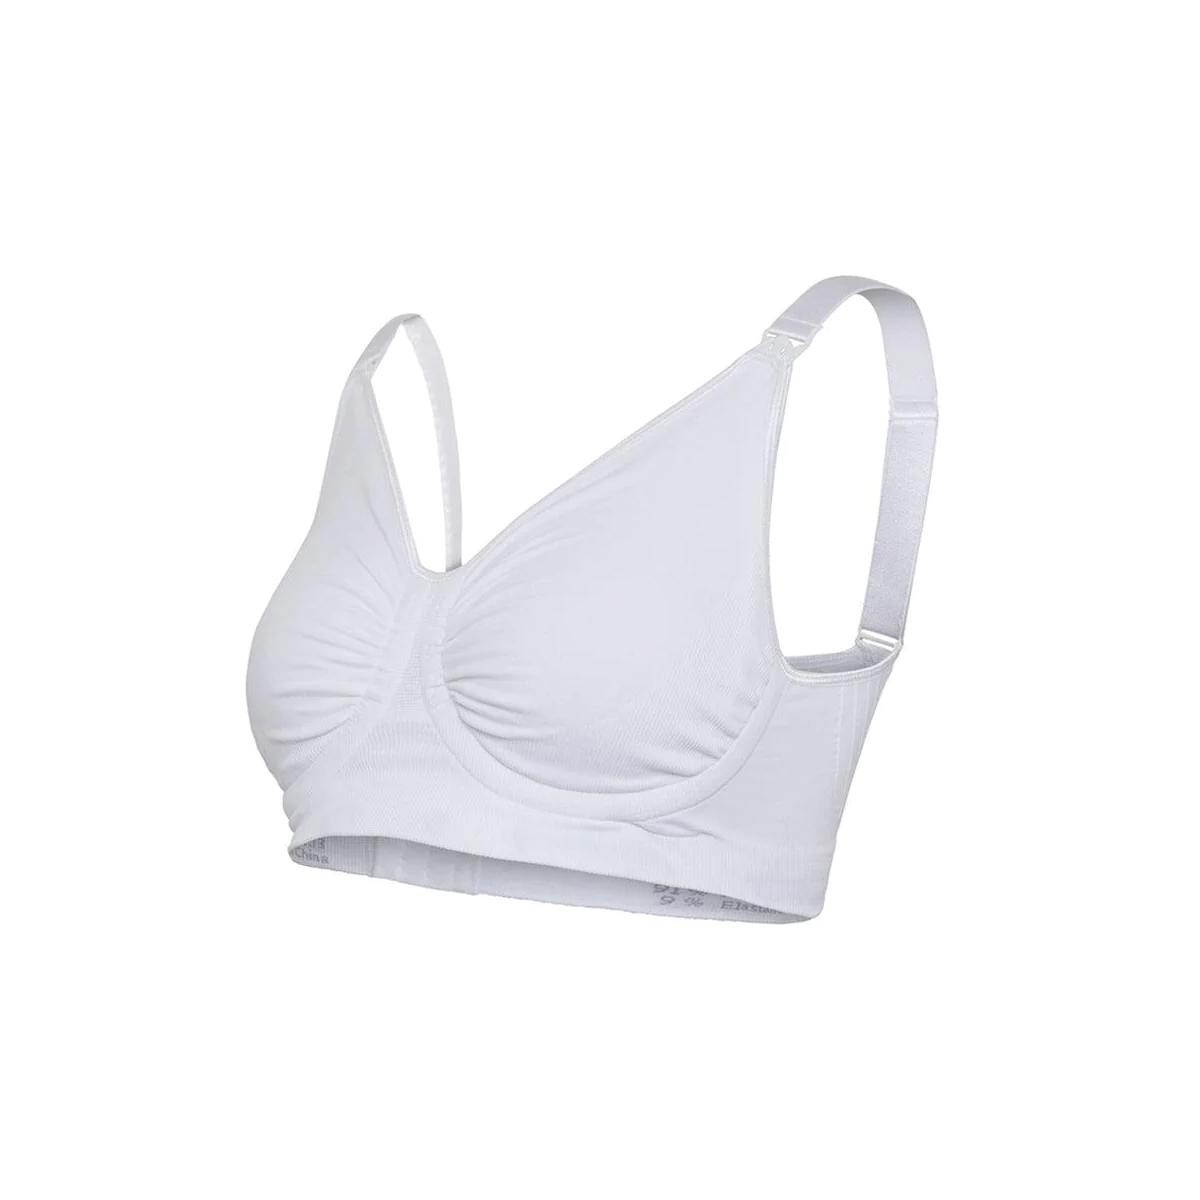 Carriwell Maternity & Nursing Bra with Carri-Gel Support - White (Size